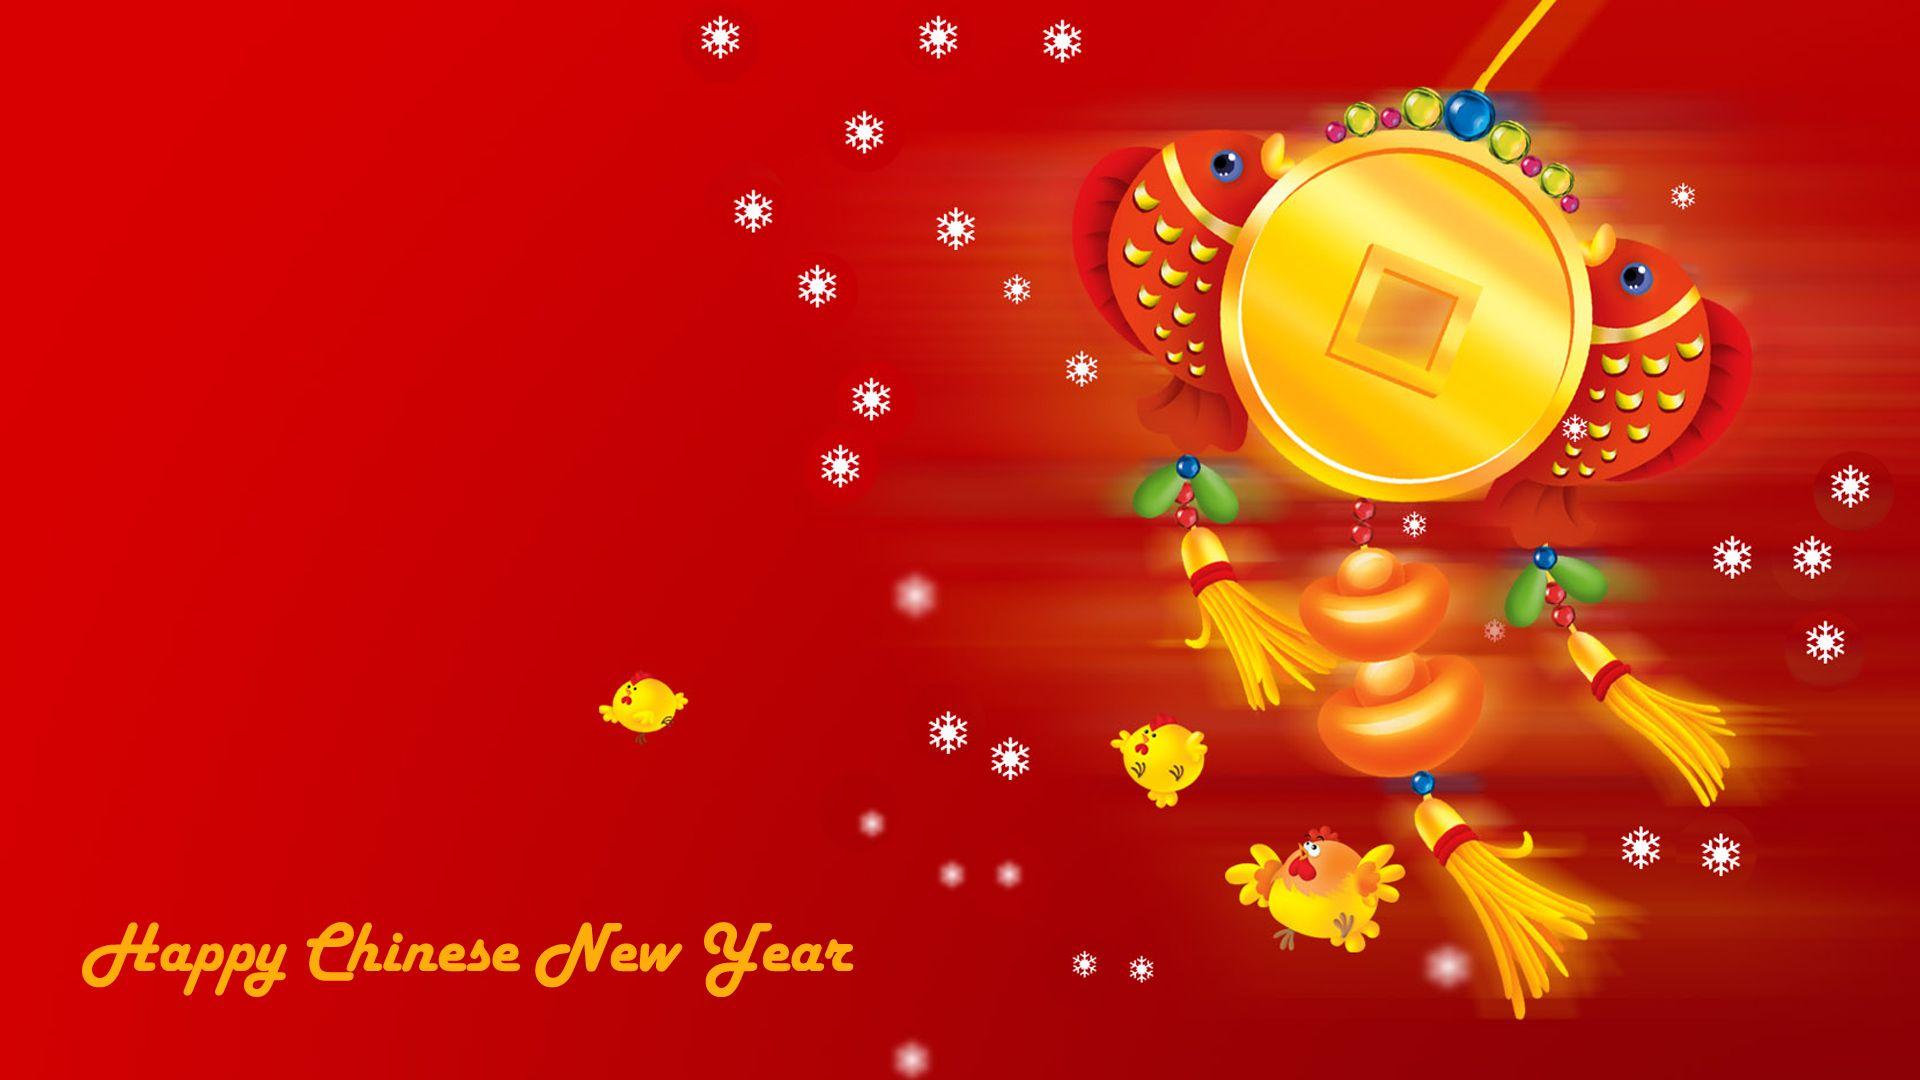 Imlek Wallpaper for Chinese New Year with Cartoon and Red